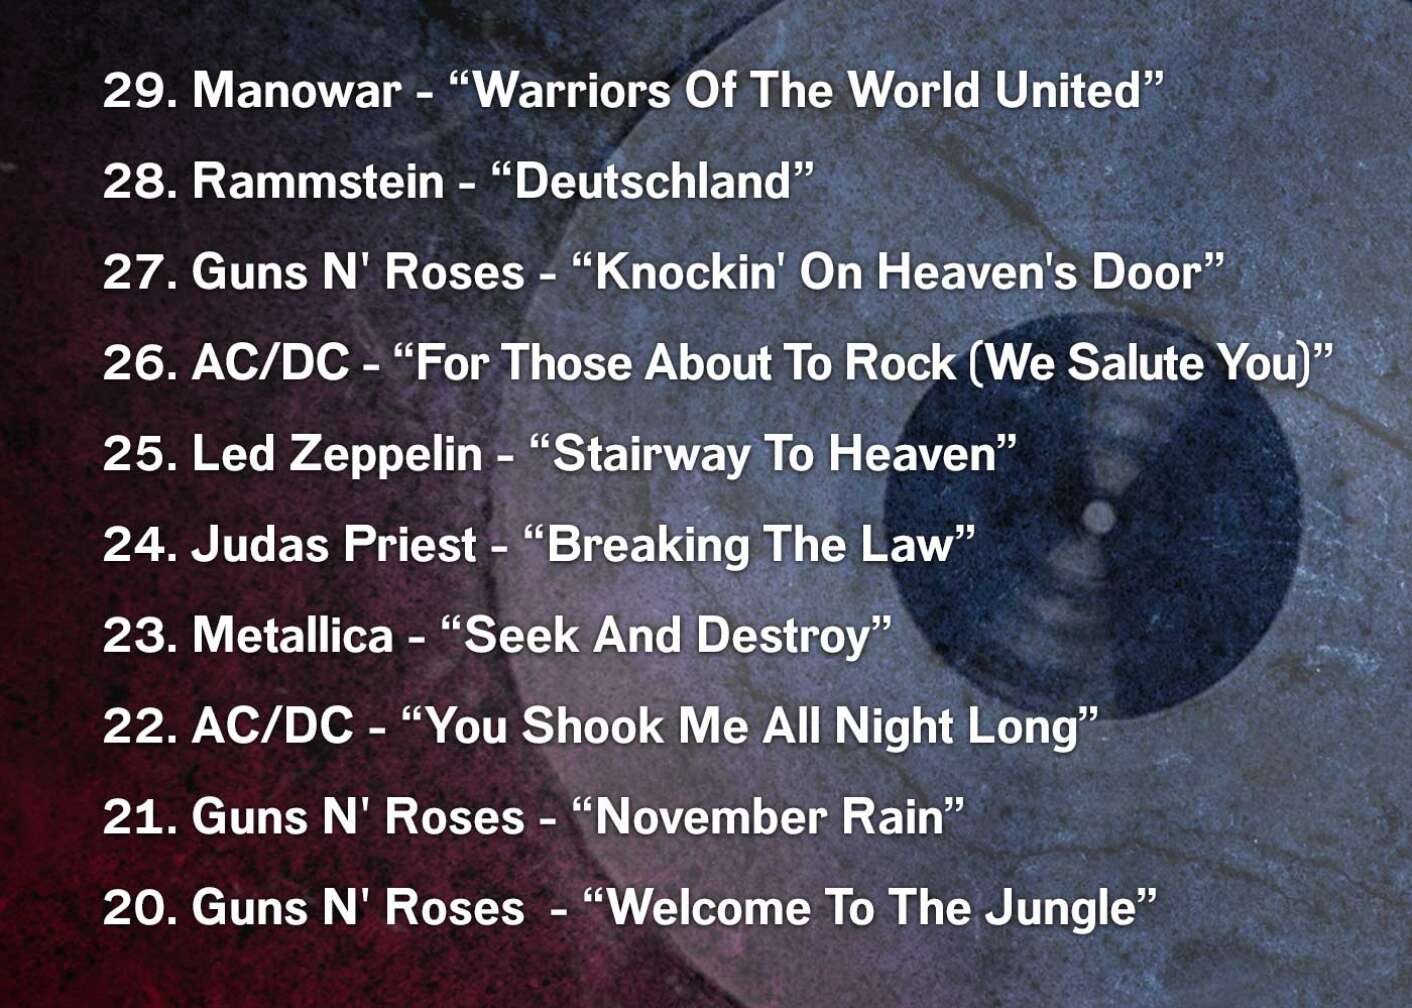 29. Manowar - “Warriors Of The World United” 28. Rammstein - “Deutschland” 27. Guns N' Roses - “Knockin' On Heaven's Door” 26. AC/DC - “For Those About To Rock (We Salute You)” 25. Led Zeppelin - “Stairway To Heaven” 24. Judas Priest - “Breaking The Law” 23. Metallica - “Seek And Destroy” 22. AC/DC - “You Shook Me All Night Long” 21. Guns N' Roses - “November Rain” 20. Guns N' Roses	 - “Welcome To The Jungle”